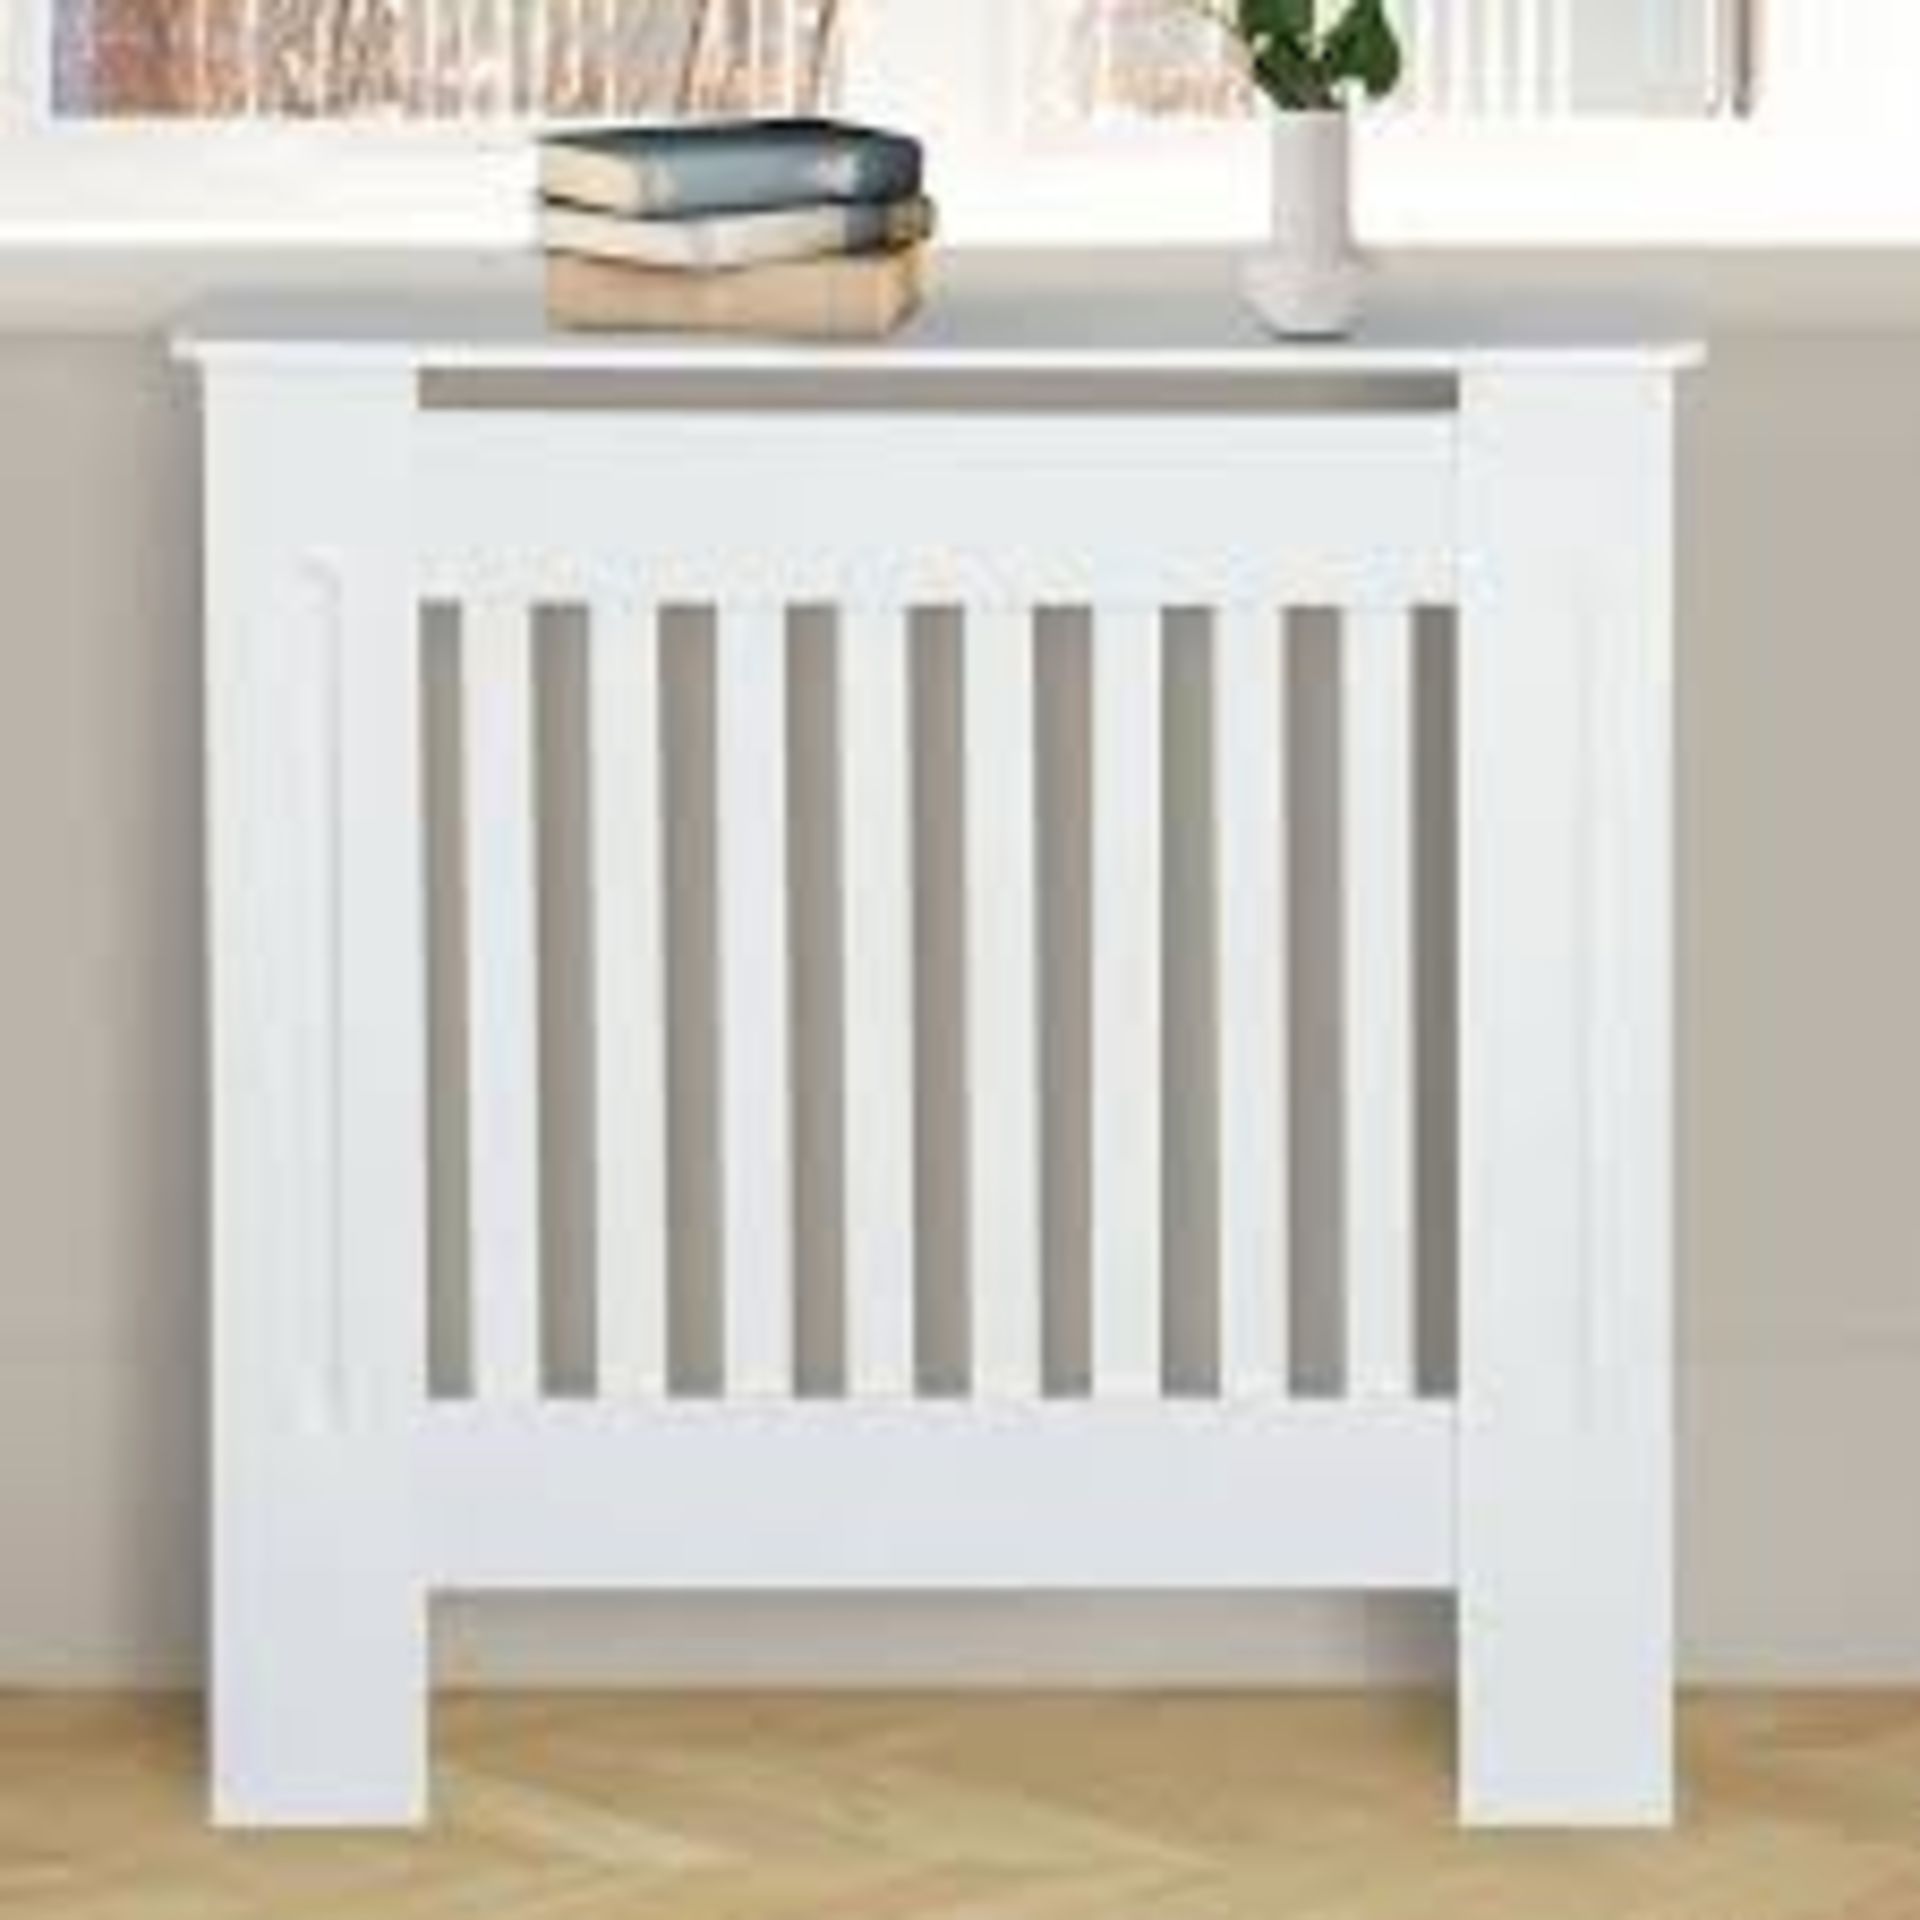 Boxed Dwayne Small Radiator Cover RRP £60 (18428) (Appraisals Available Upon Request) (Photos are